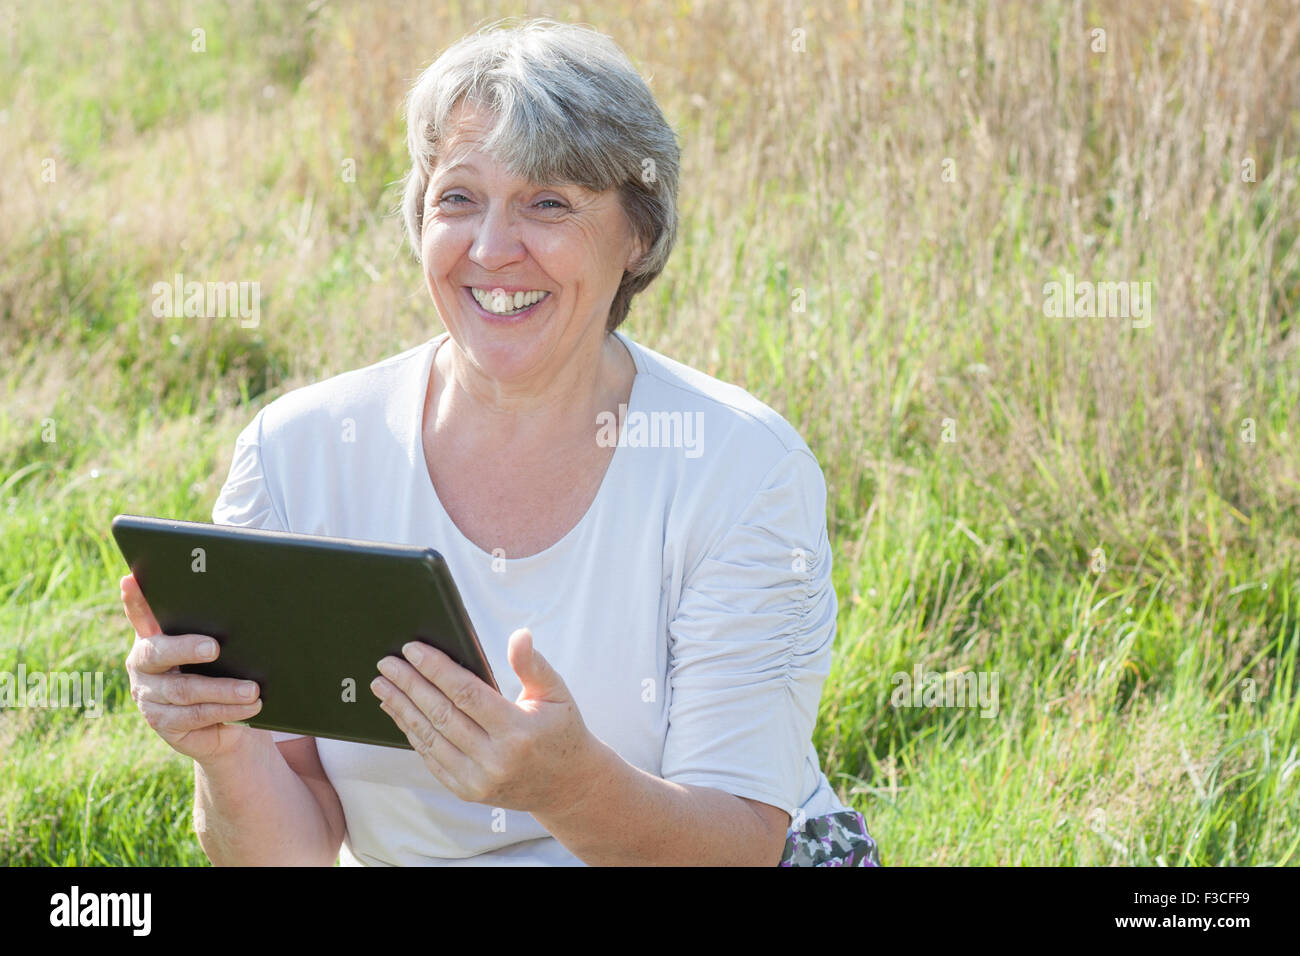 Senior woman using tablet device Banque D'Images